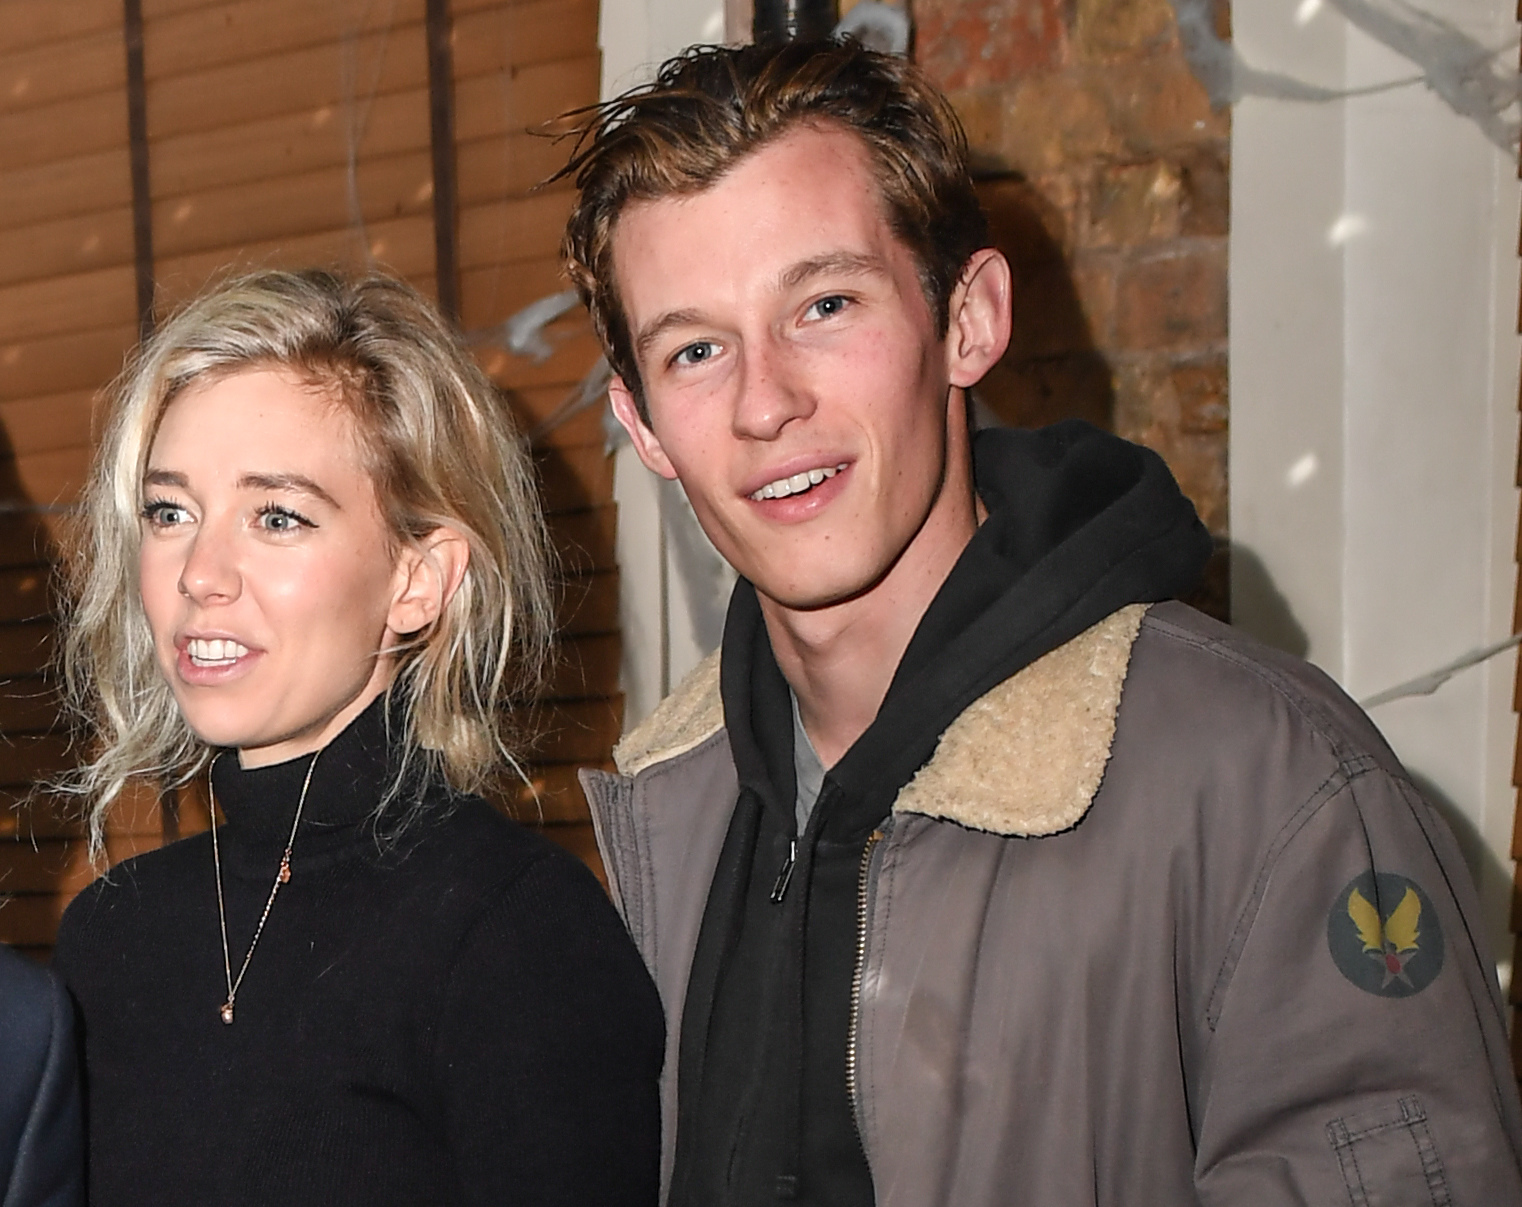 Vanessa Kirby and Callum Turner at a Halloween Party in London on October 27, 2017. | Source: Getty Images